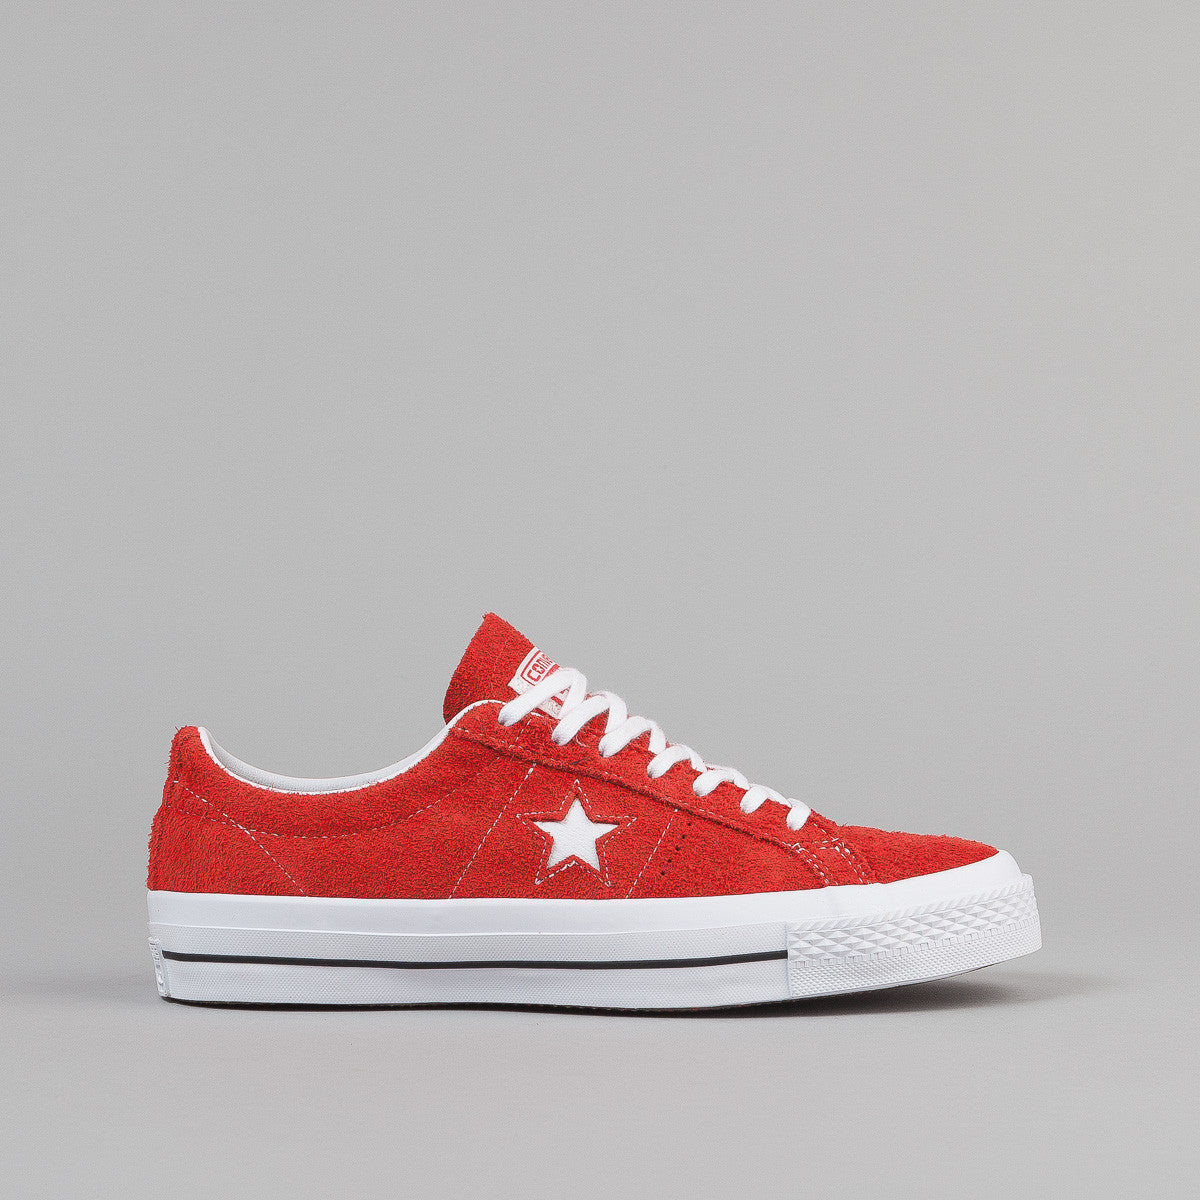 Converse One Star OX Shoes - Red / White / Gum | Flatspot